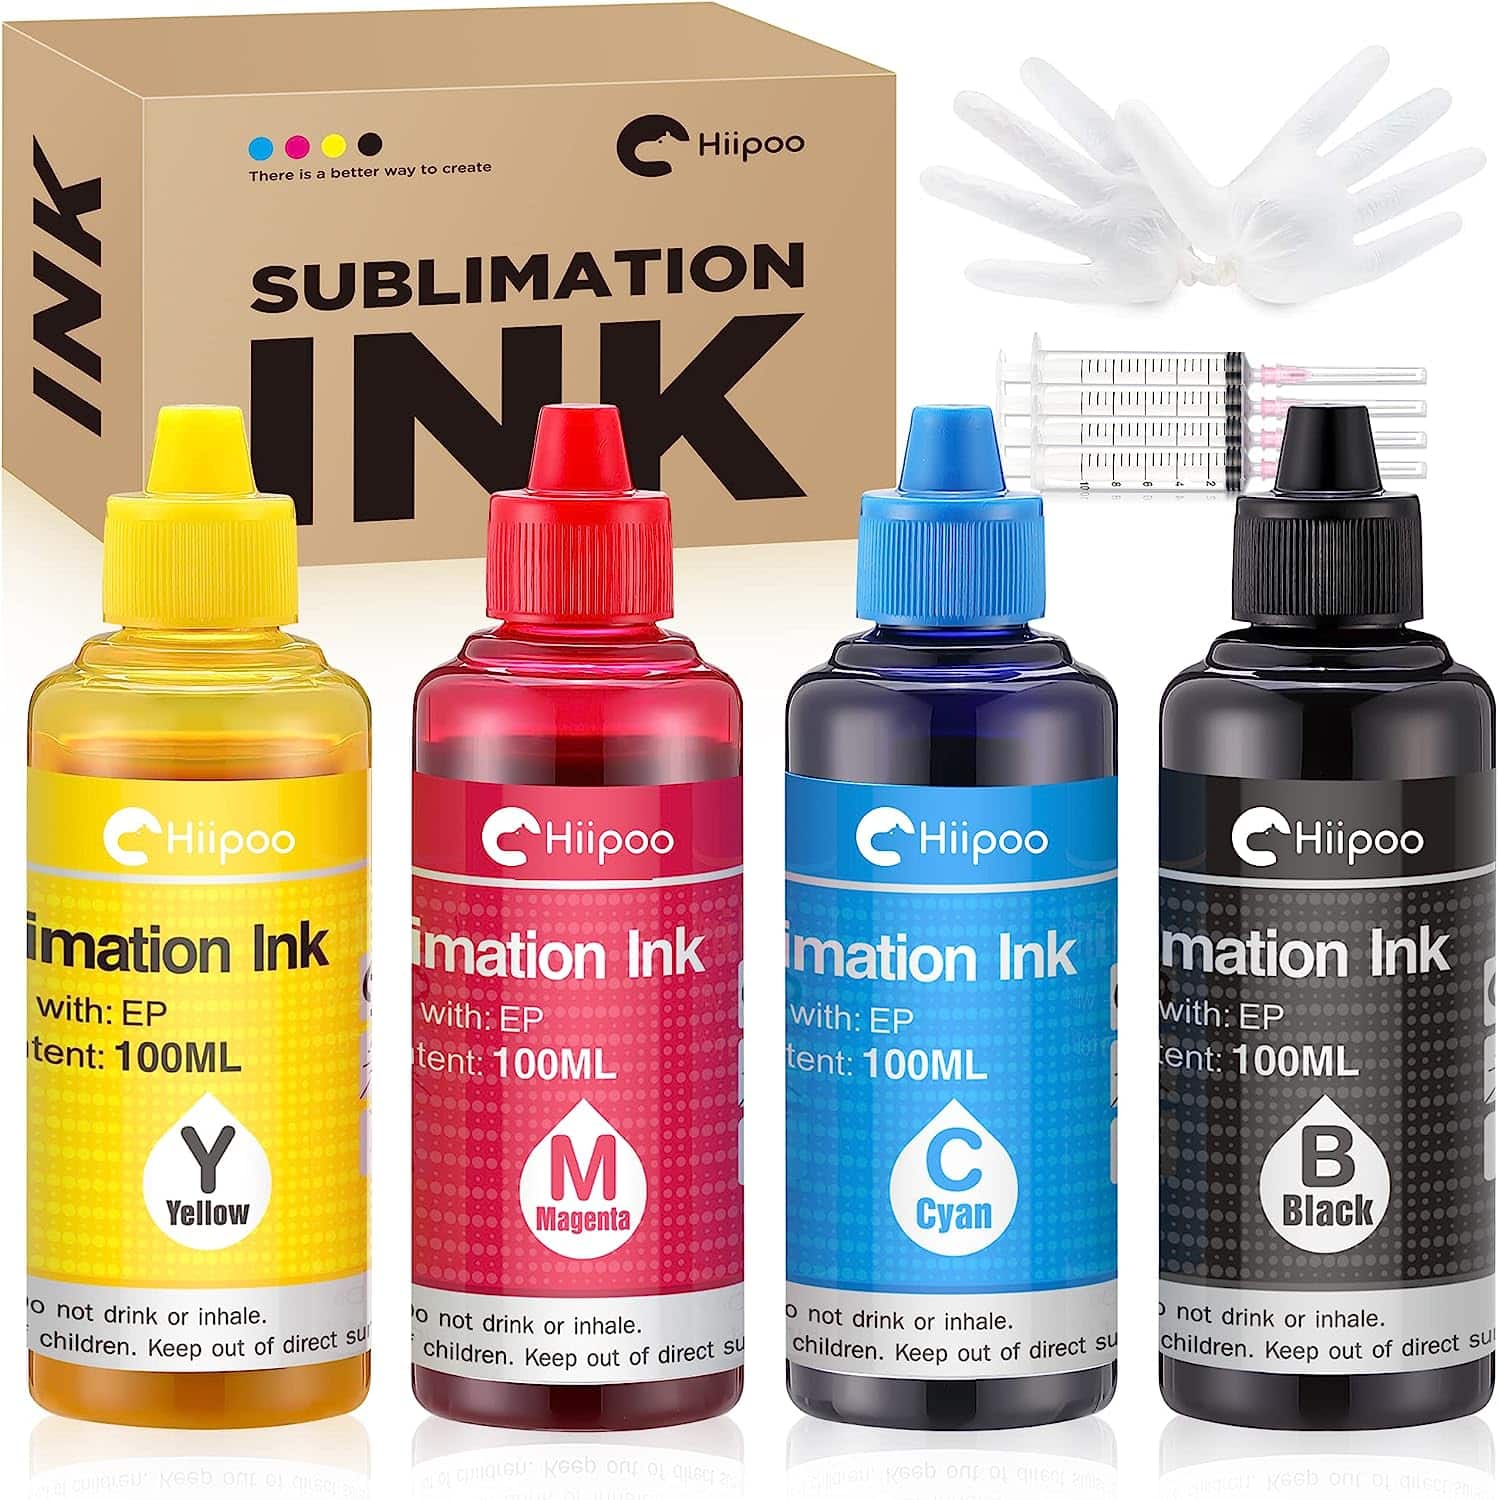 Hiipoo Sublimation Ink Refilled Bottles 